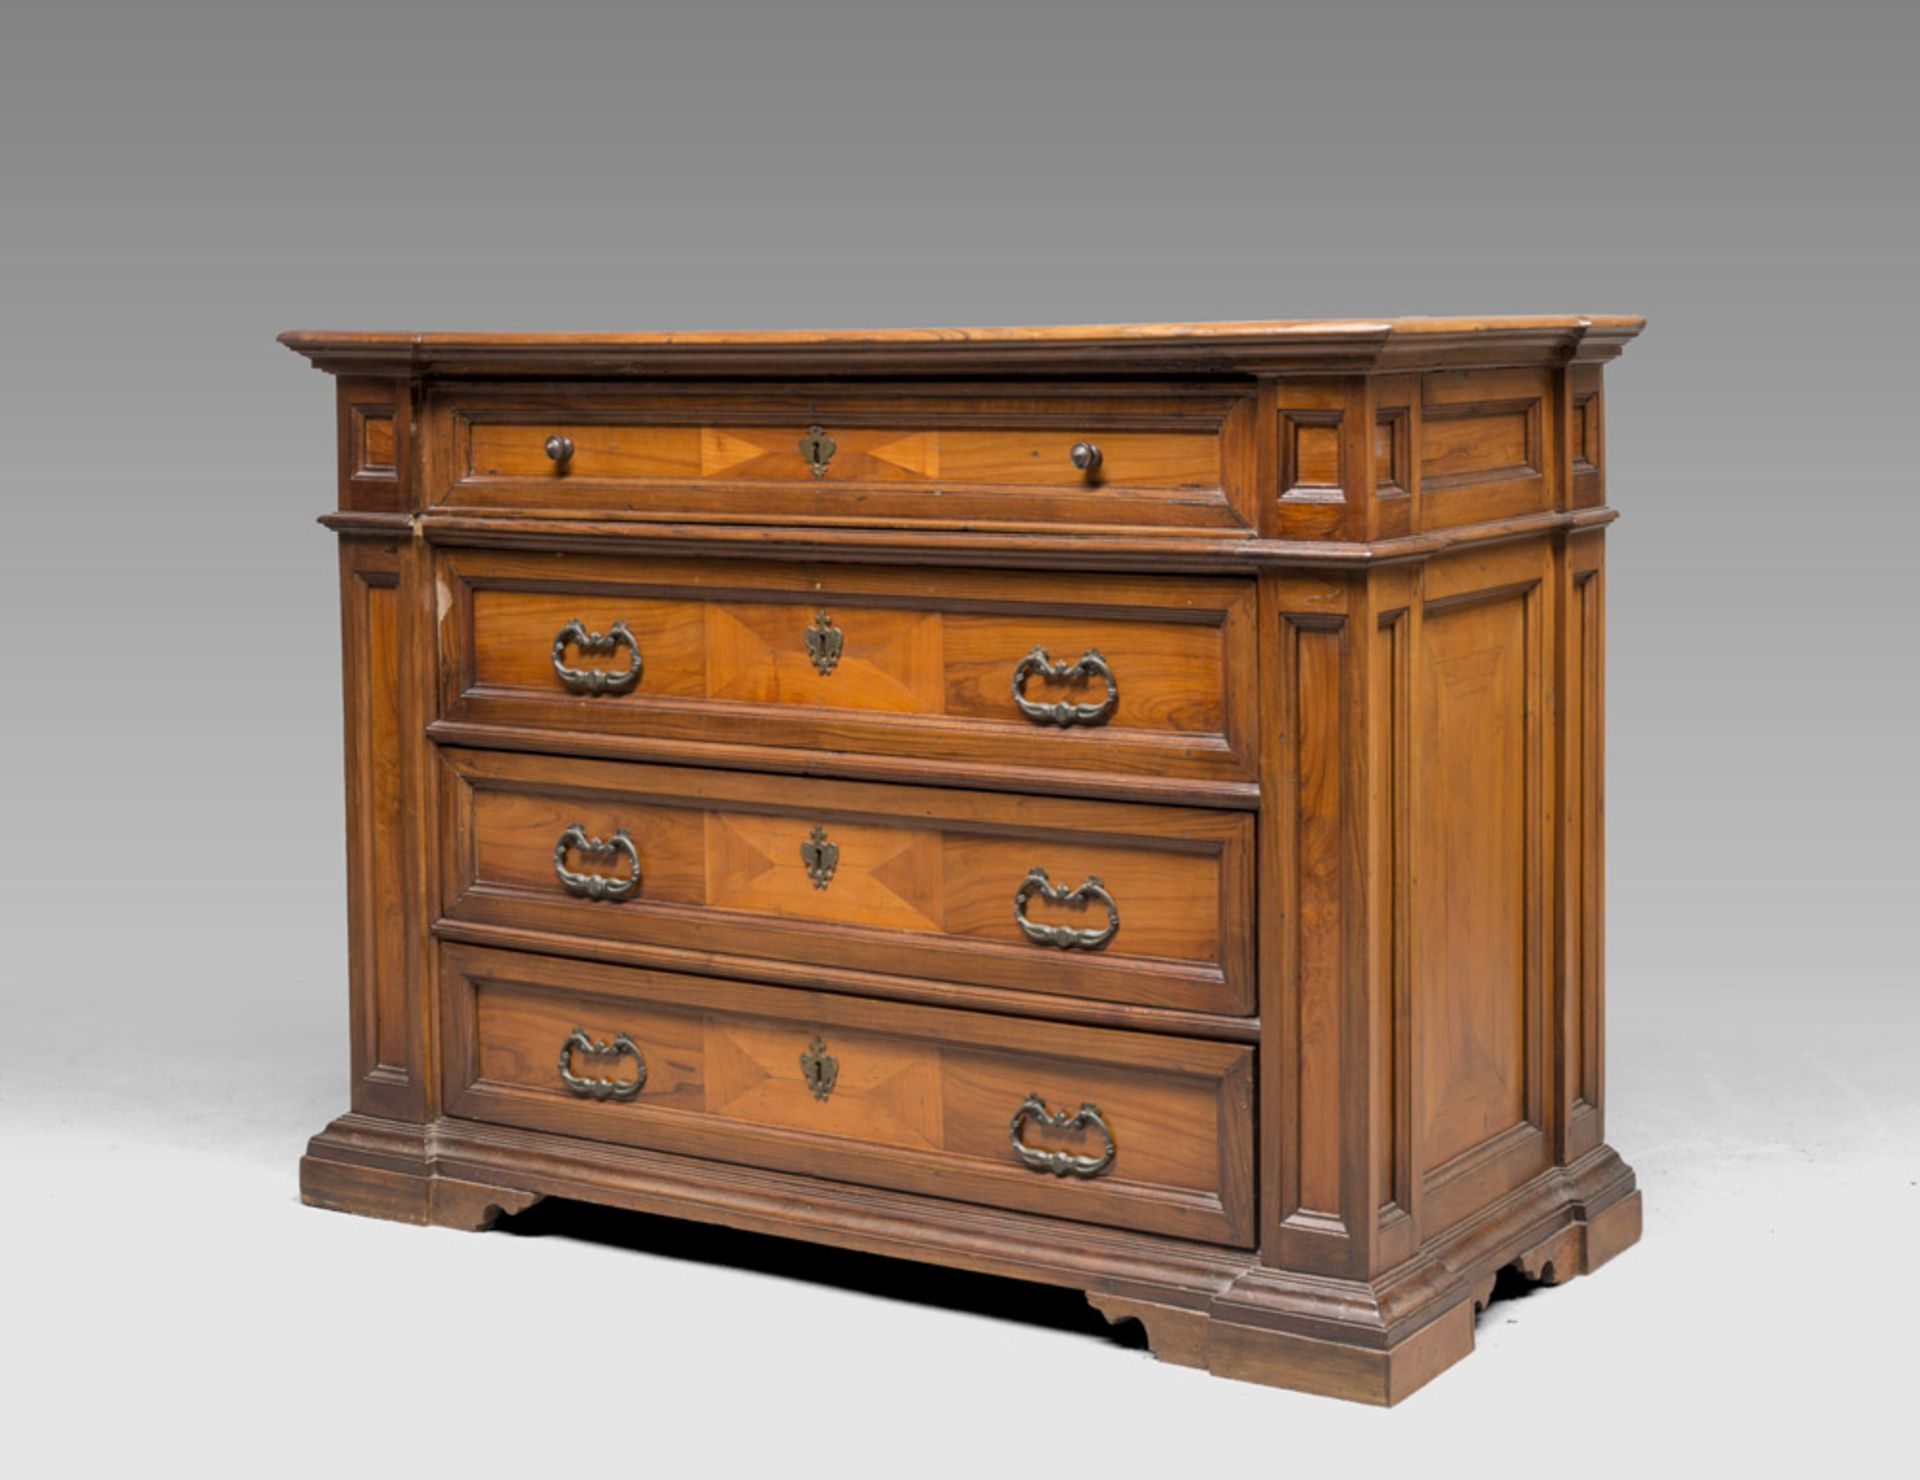 BEAUTIFUL TALLBOY IN CHERRY, TUSCAN 18TH CENTURY with reserves in violet wood. Top inlayed to